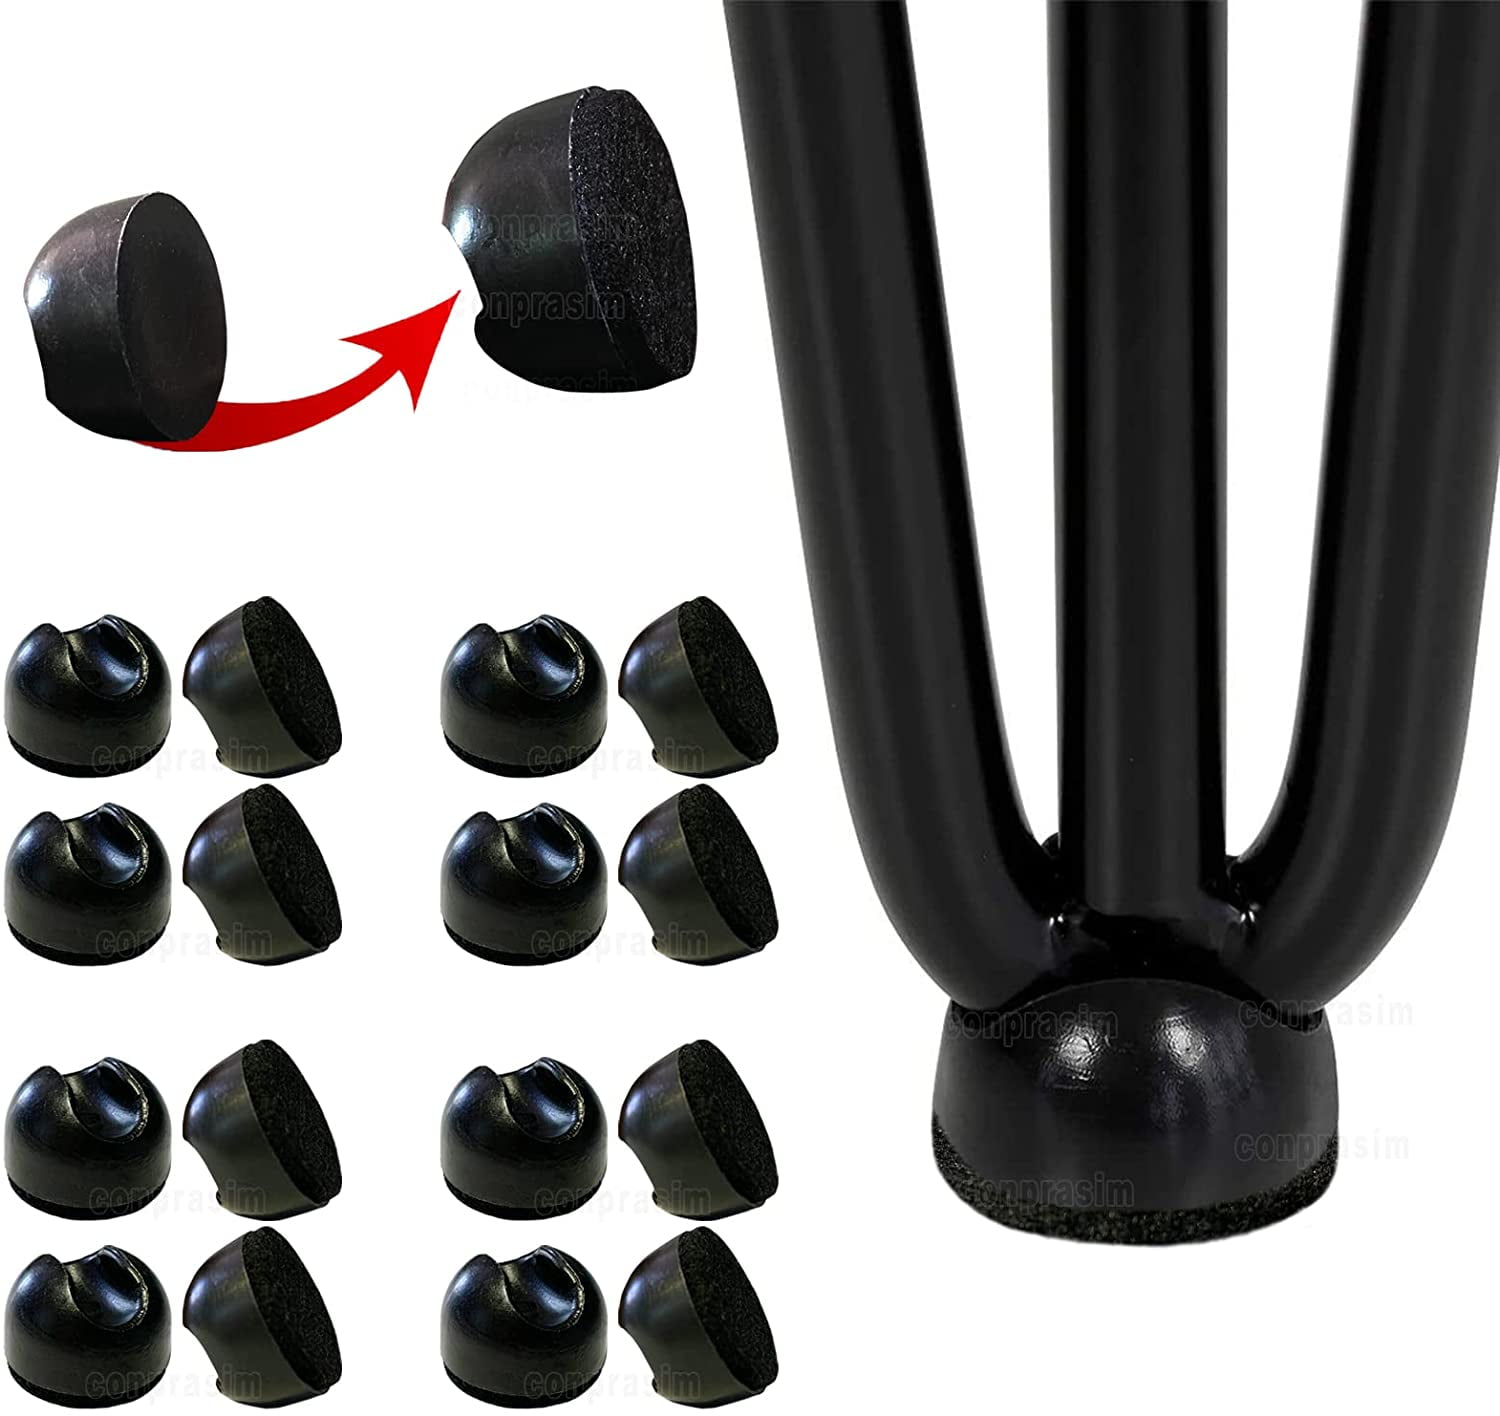 Black New Tight Fit for 3/8" and 1... Details about   Hairpin Leg Protector Feet Set of 12 